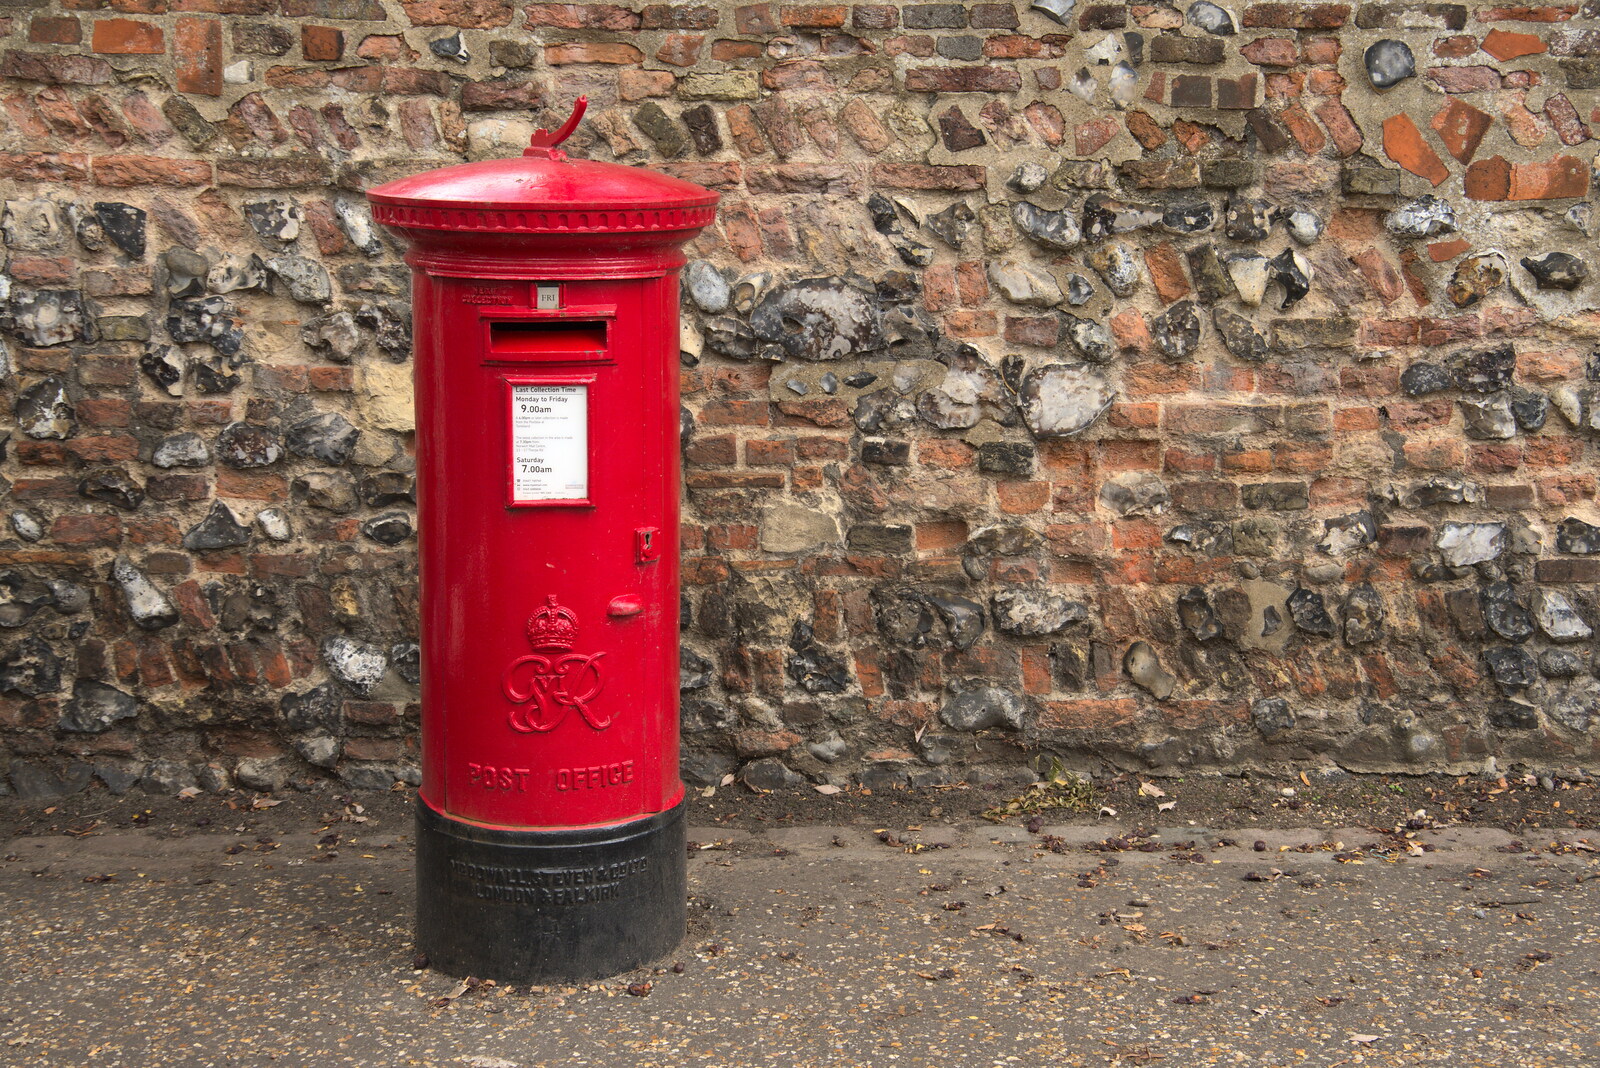 A red GR post box from Dippy and the City Dinosaur Trail, Norwich, Norfolk - 19th August 2021